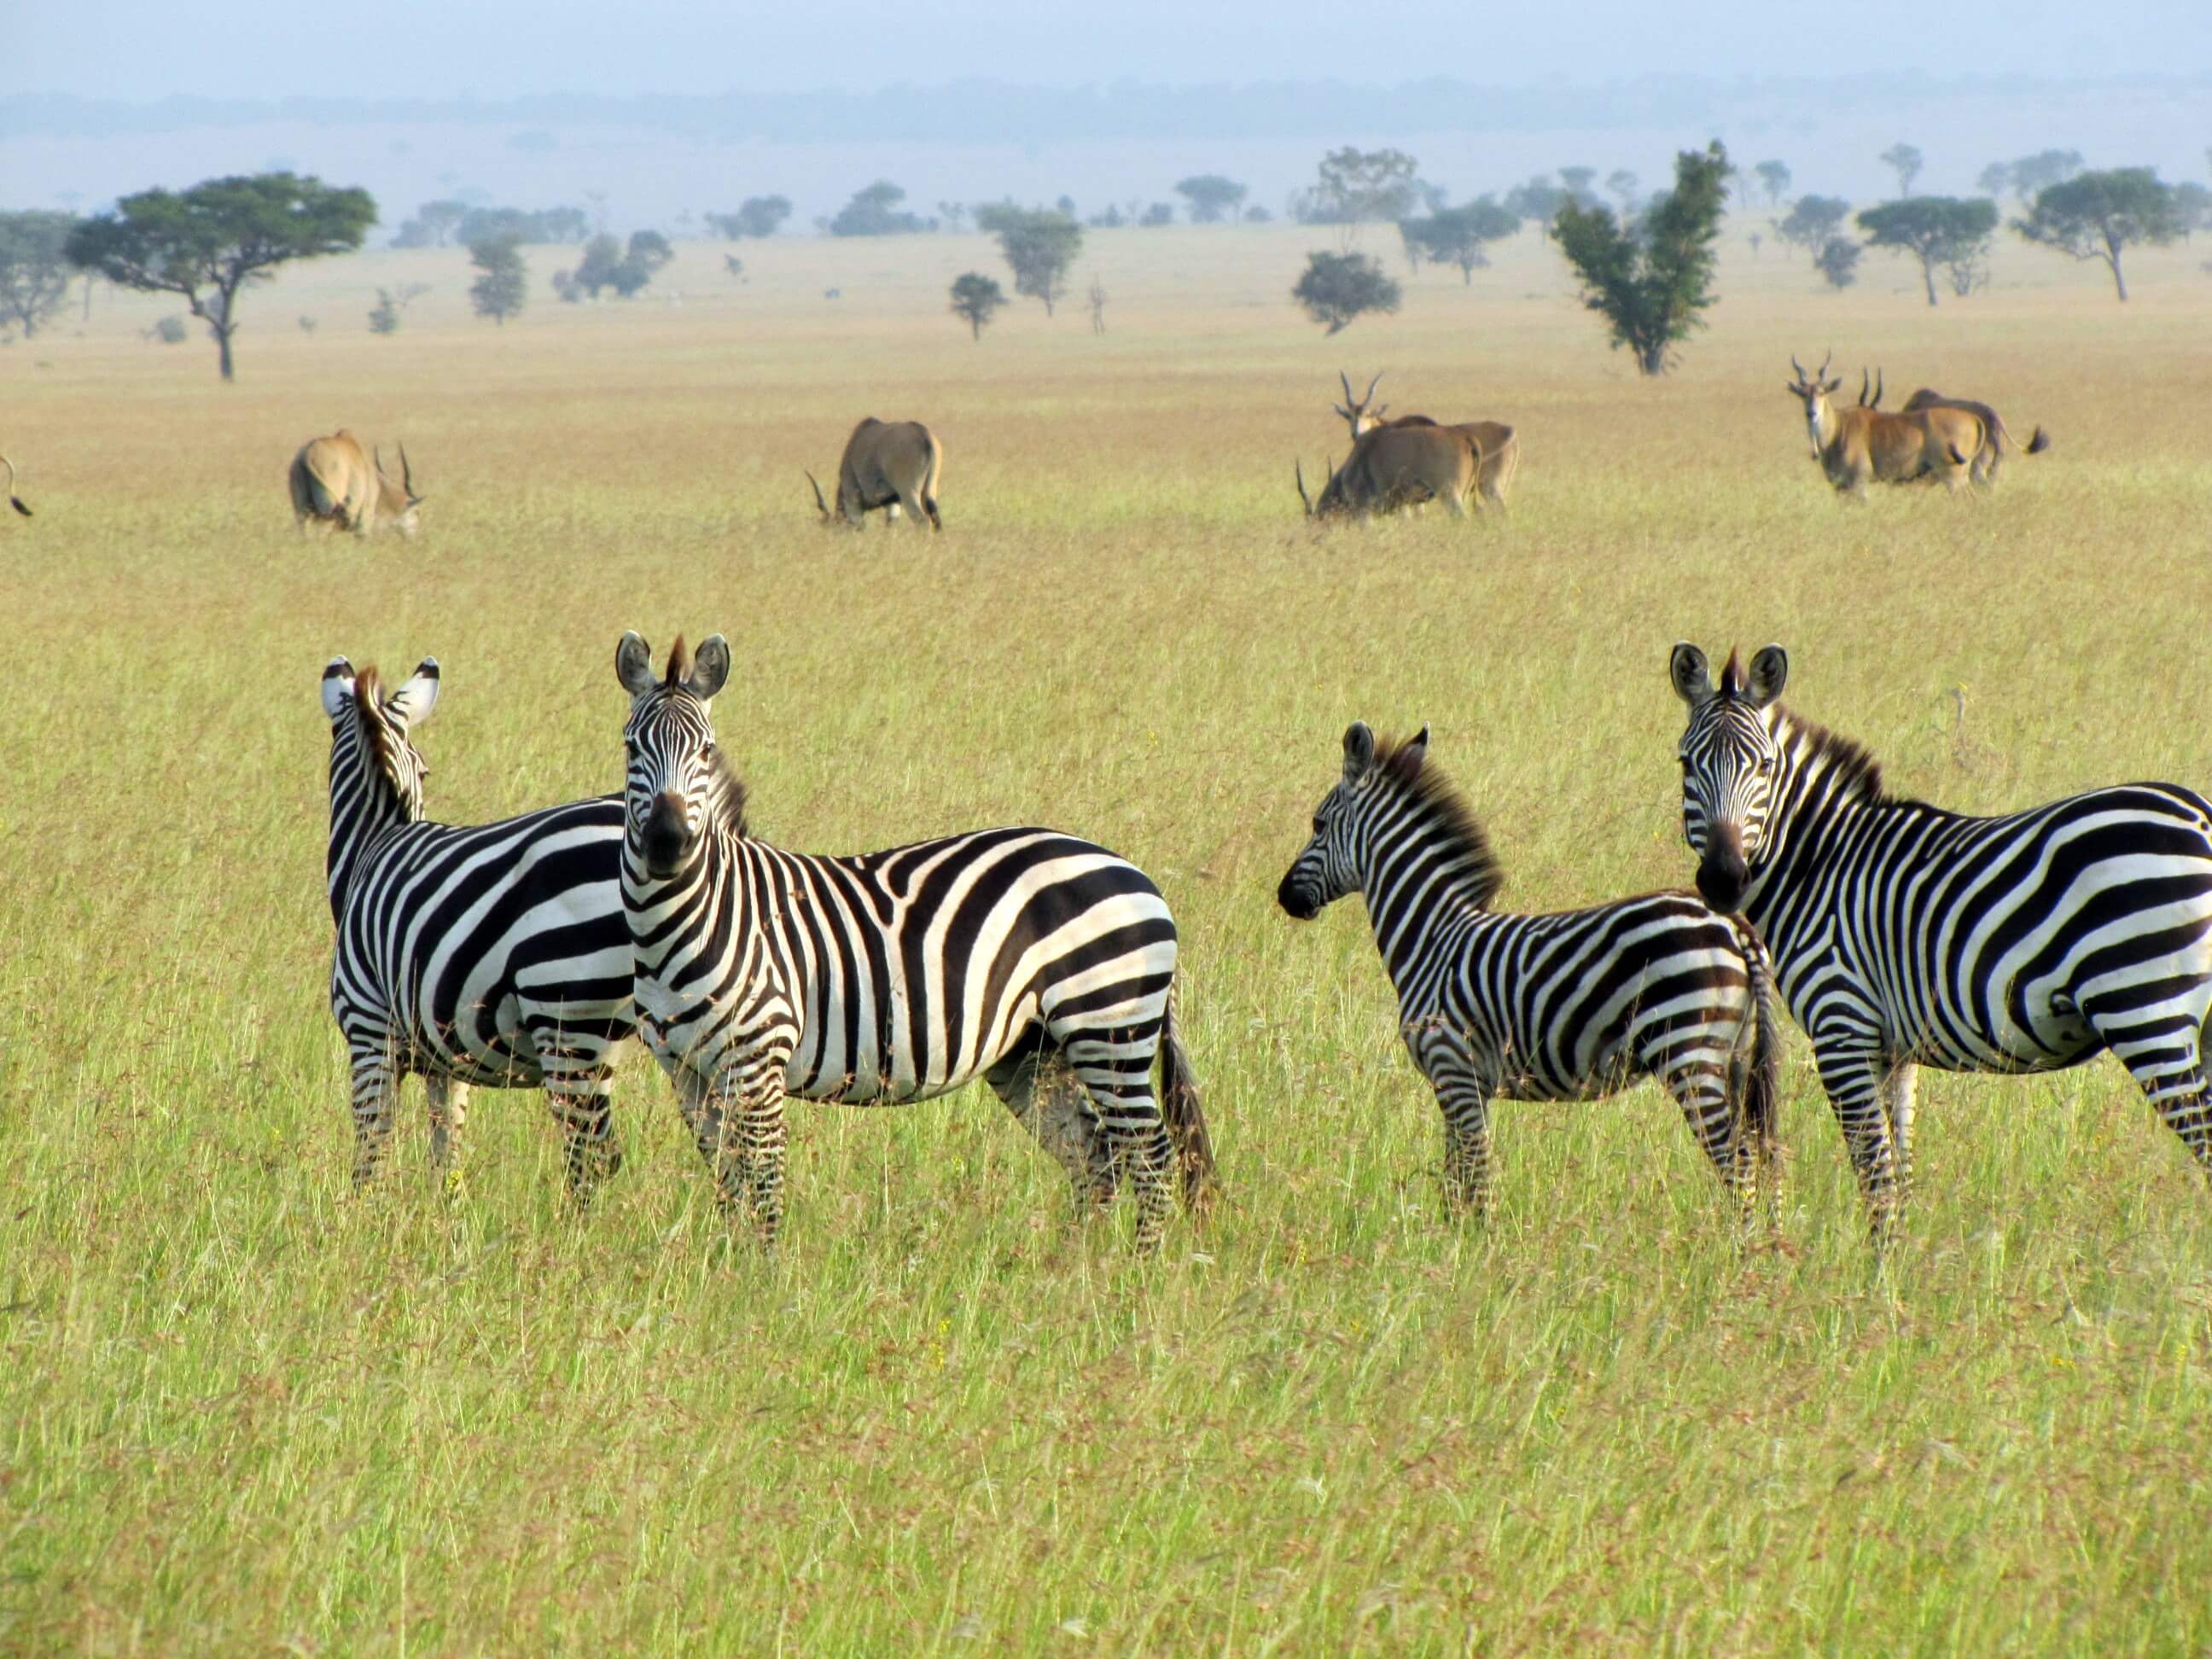 Migration of zebras and other ungulates in Africa. Photo: shutterstock